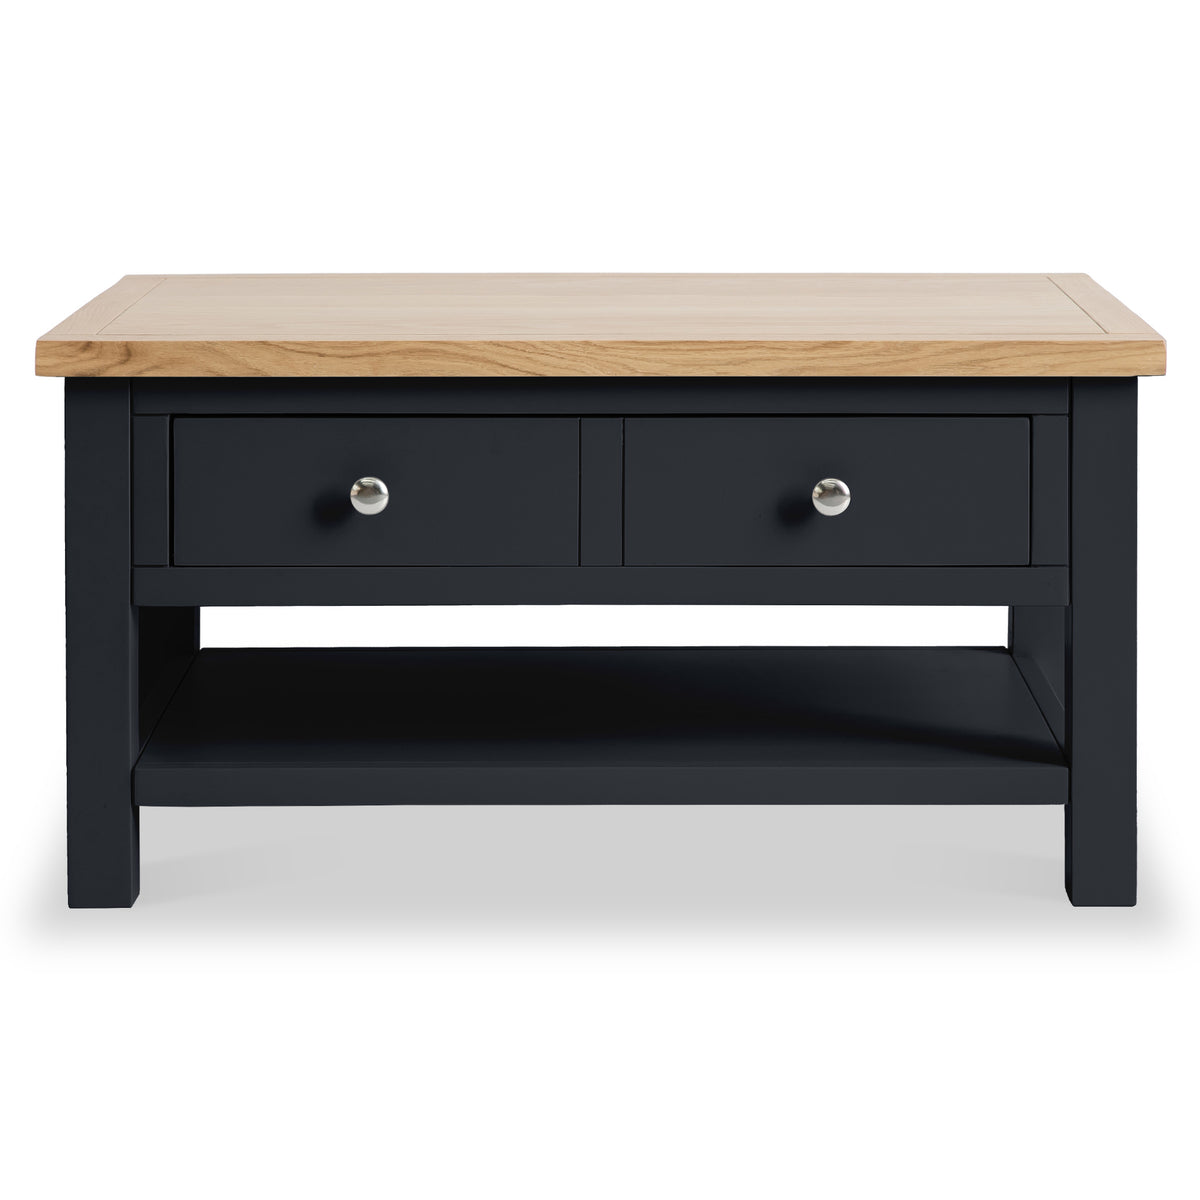 Farrow Black Coffee Table with Drawer